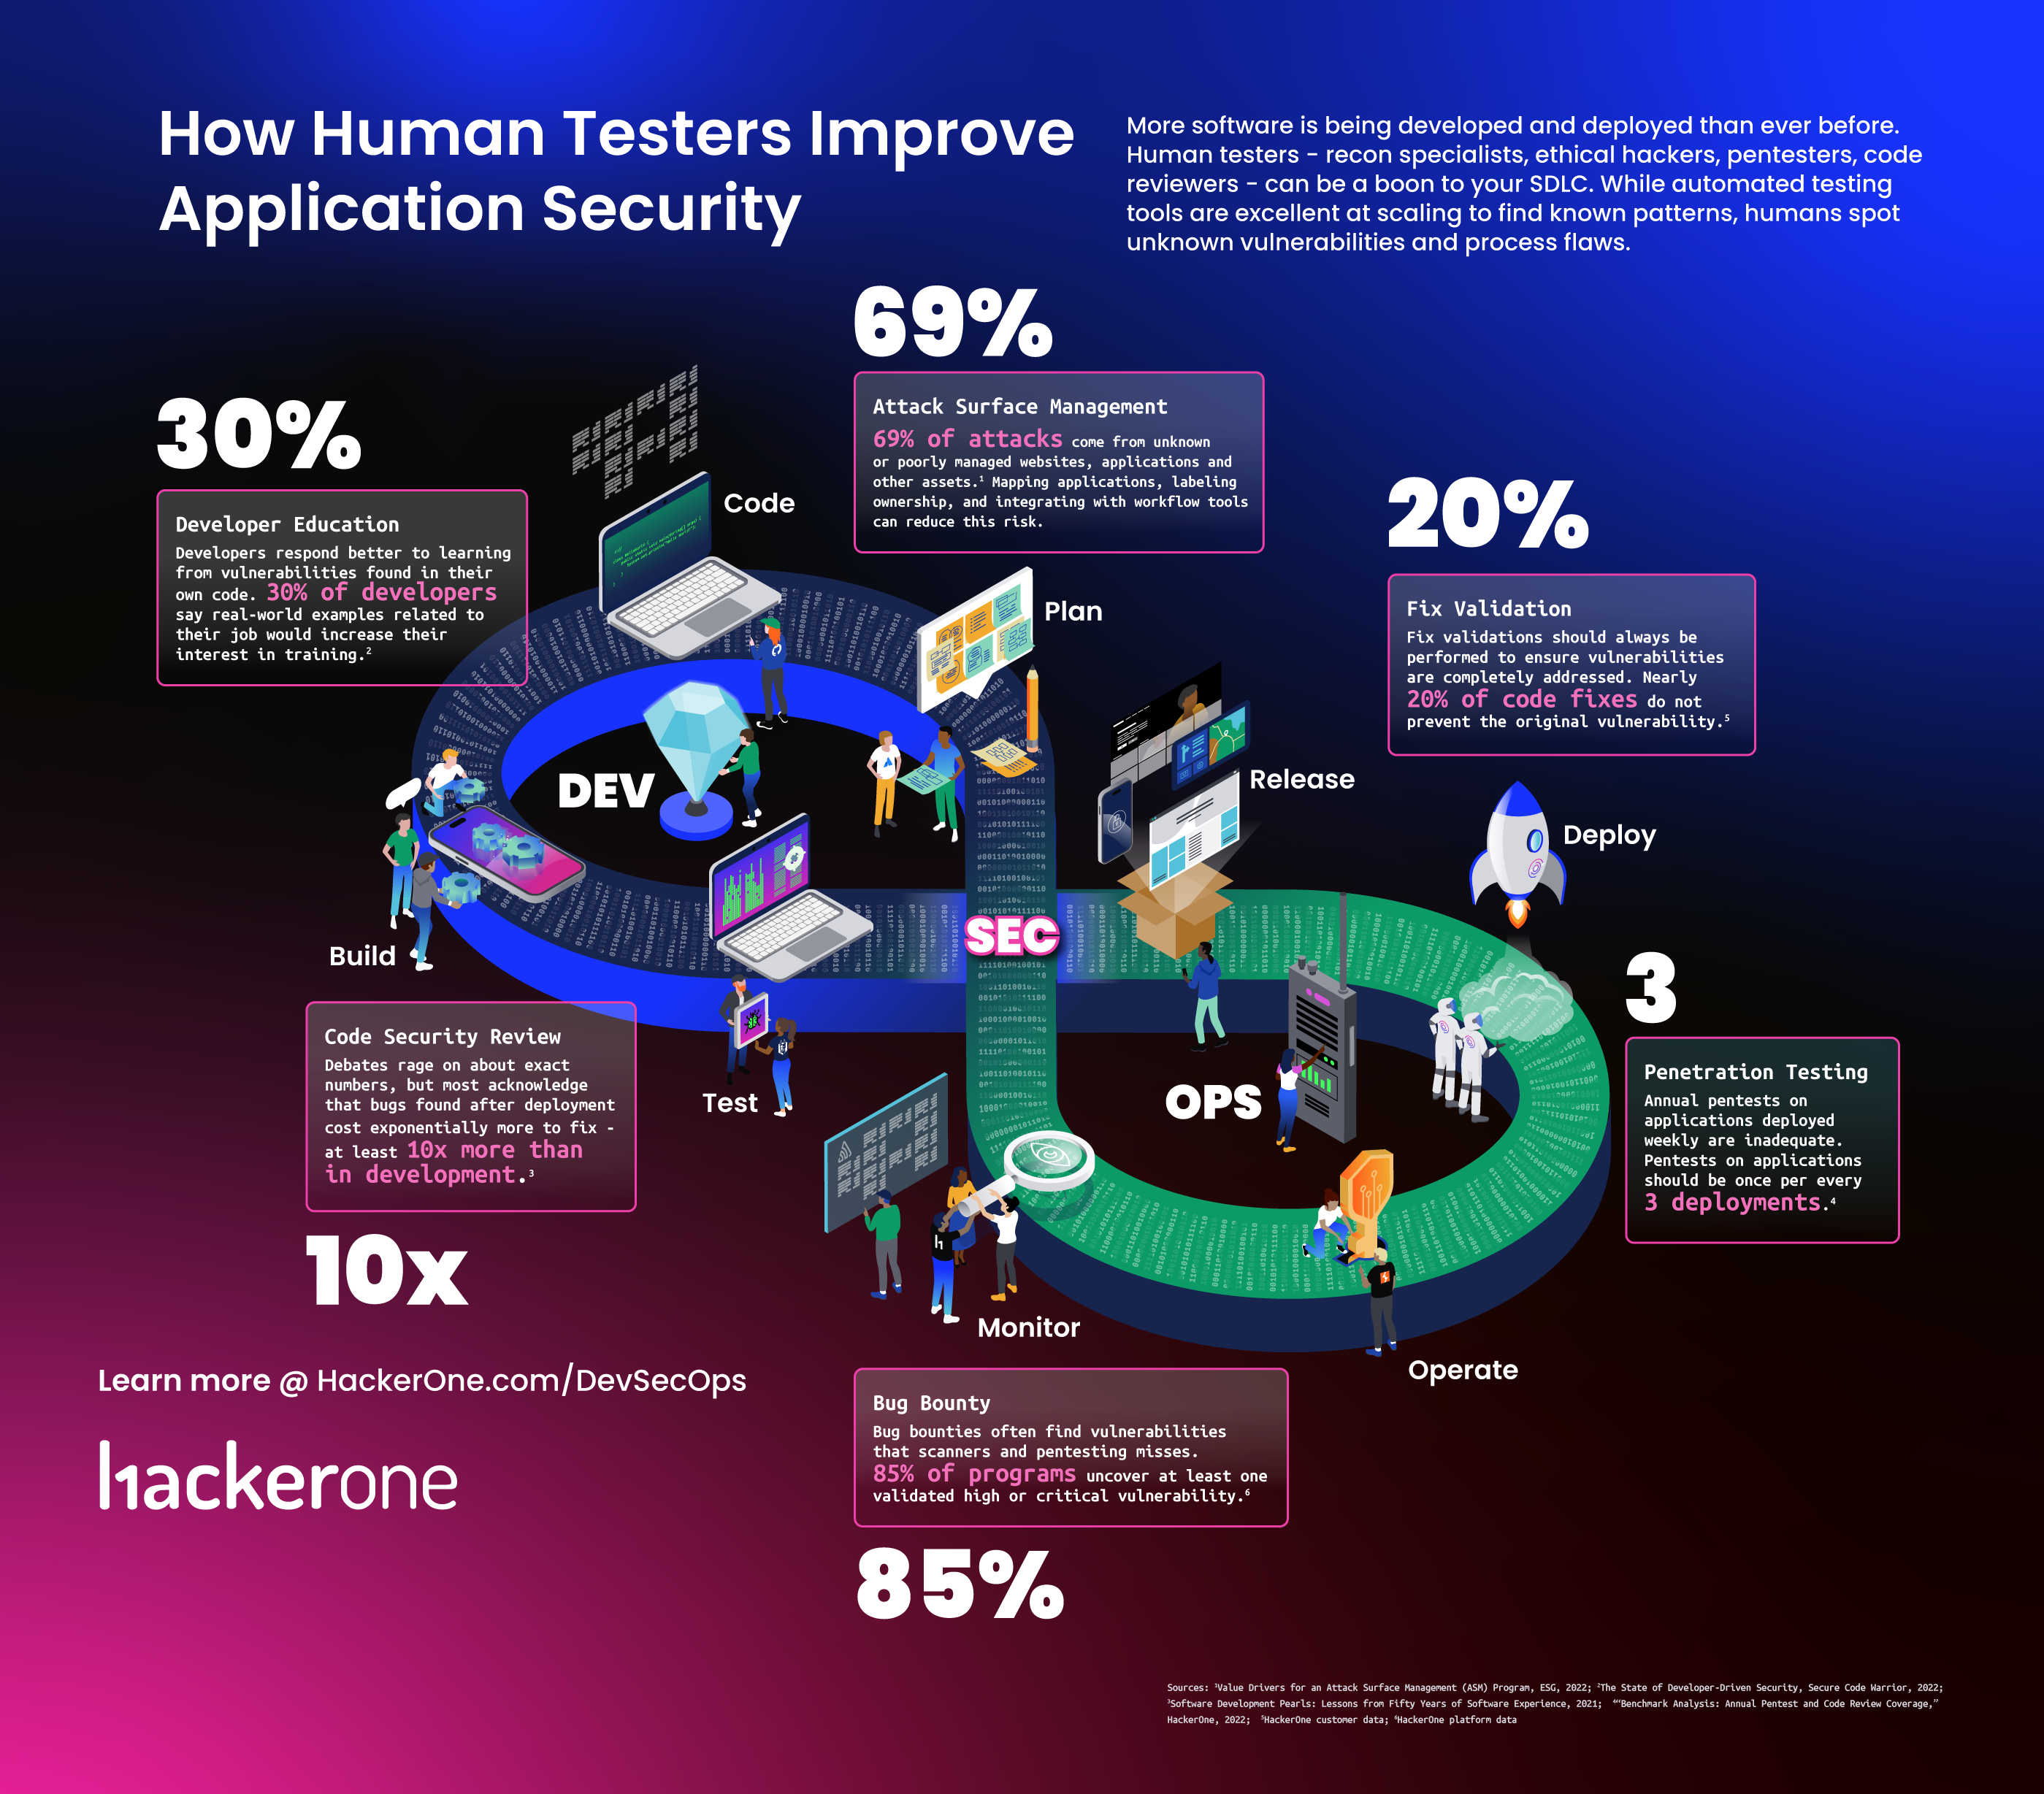 HackerOne Infographic - How Human Testers Improve Application Security 